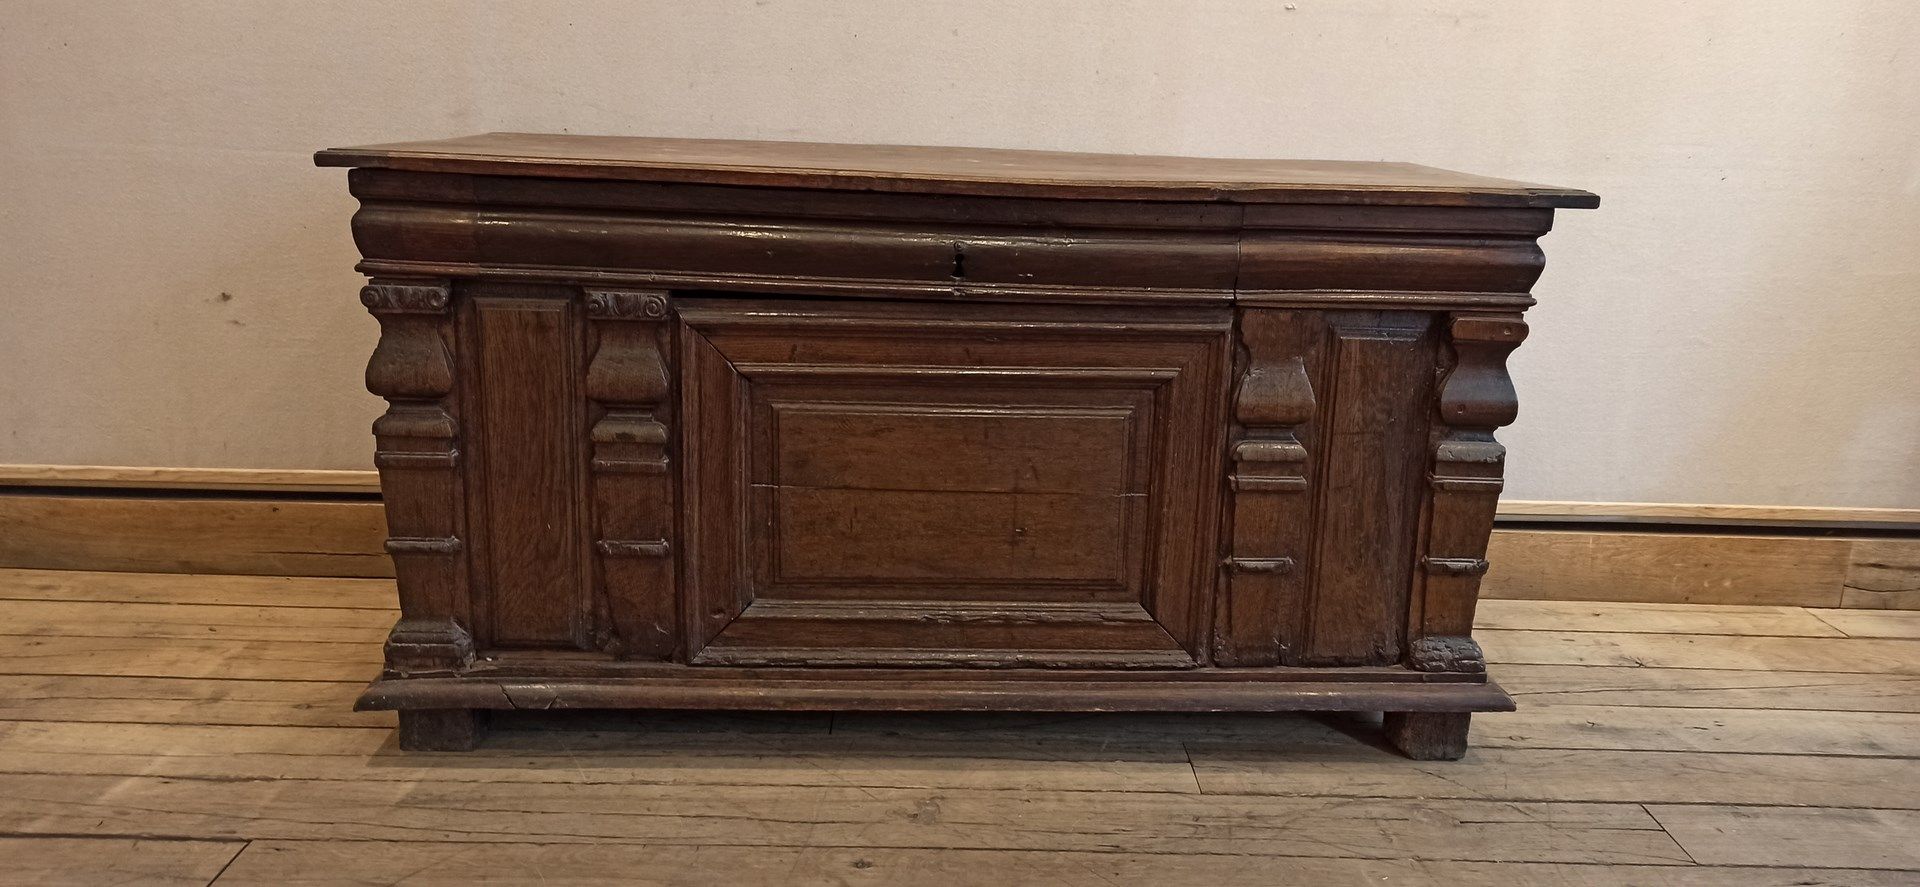 Null Natural wood chest with column decoration, one side missing